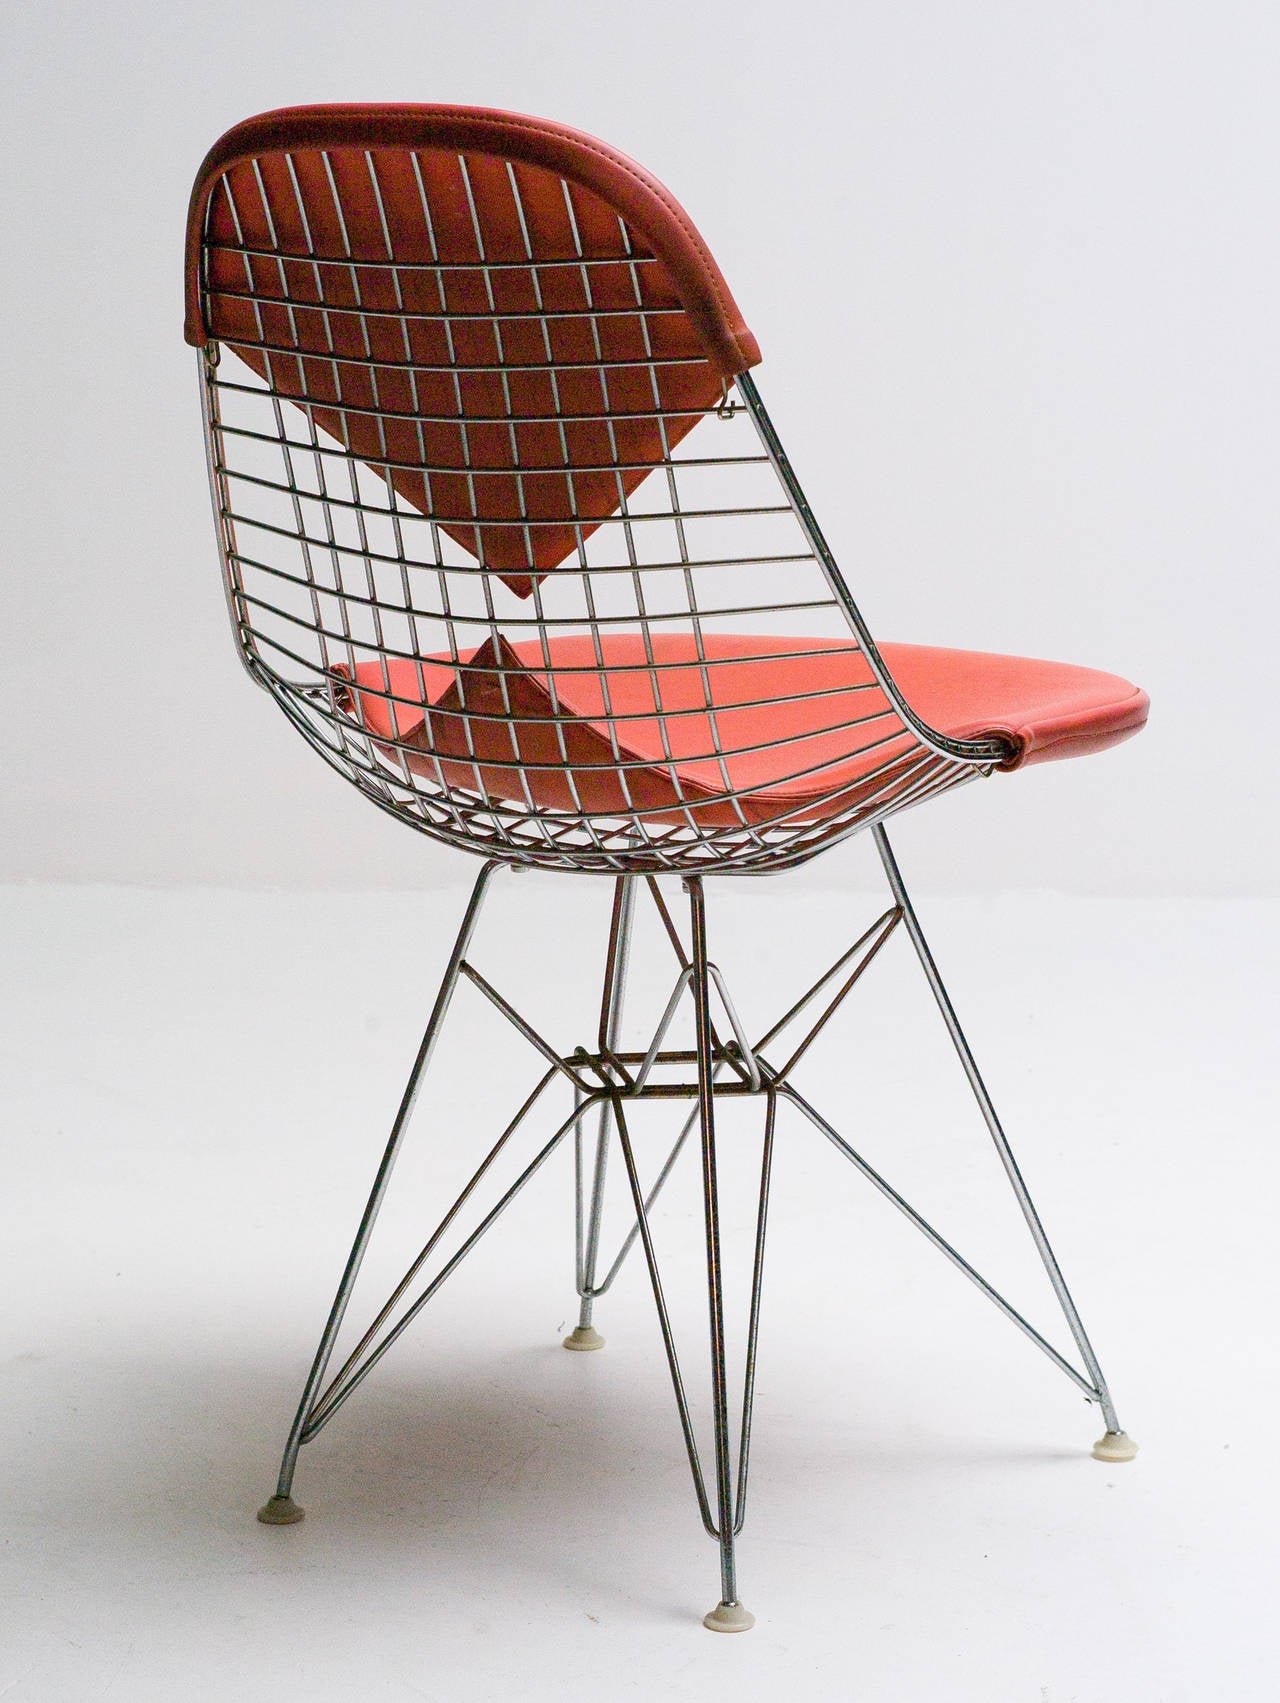 Charles Eames For Herman Miller Dkr Wire Chair With Original